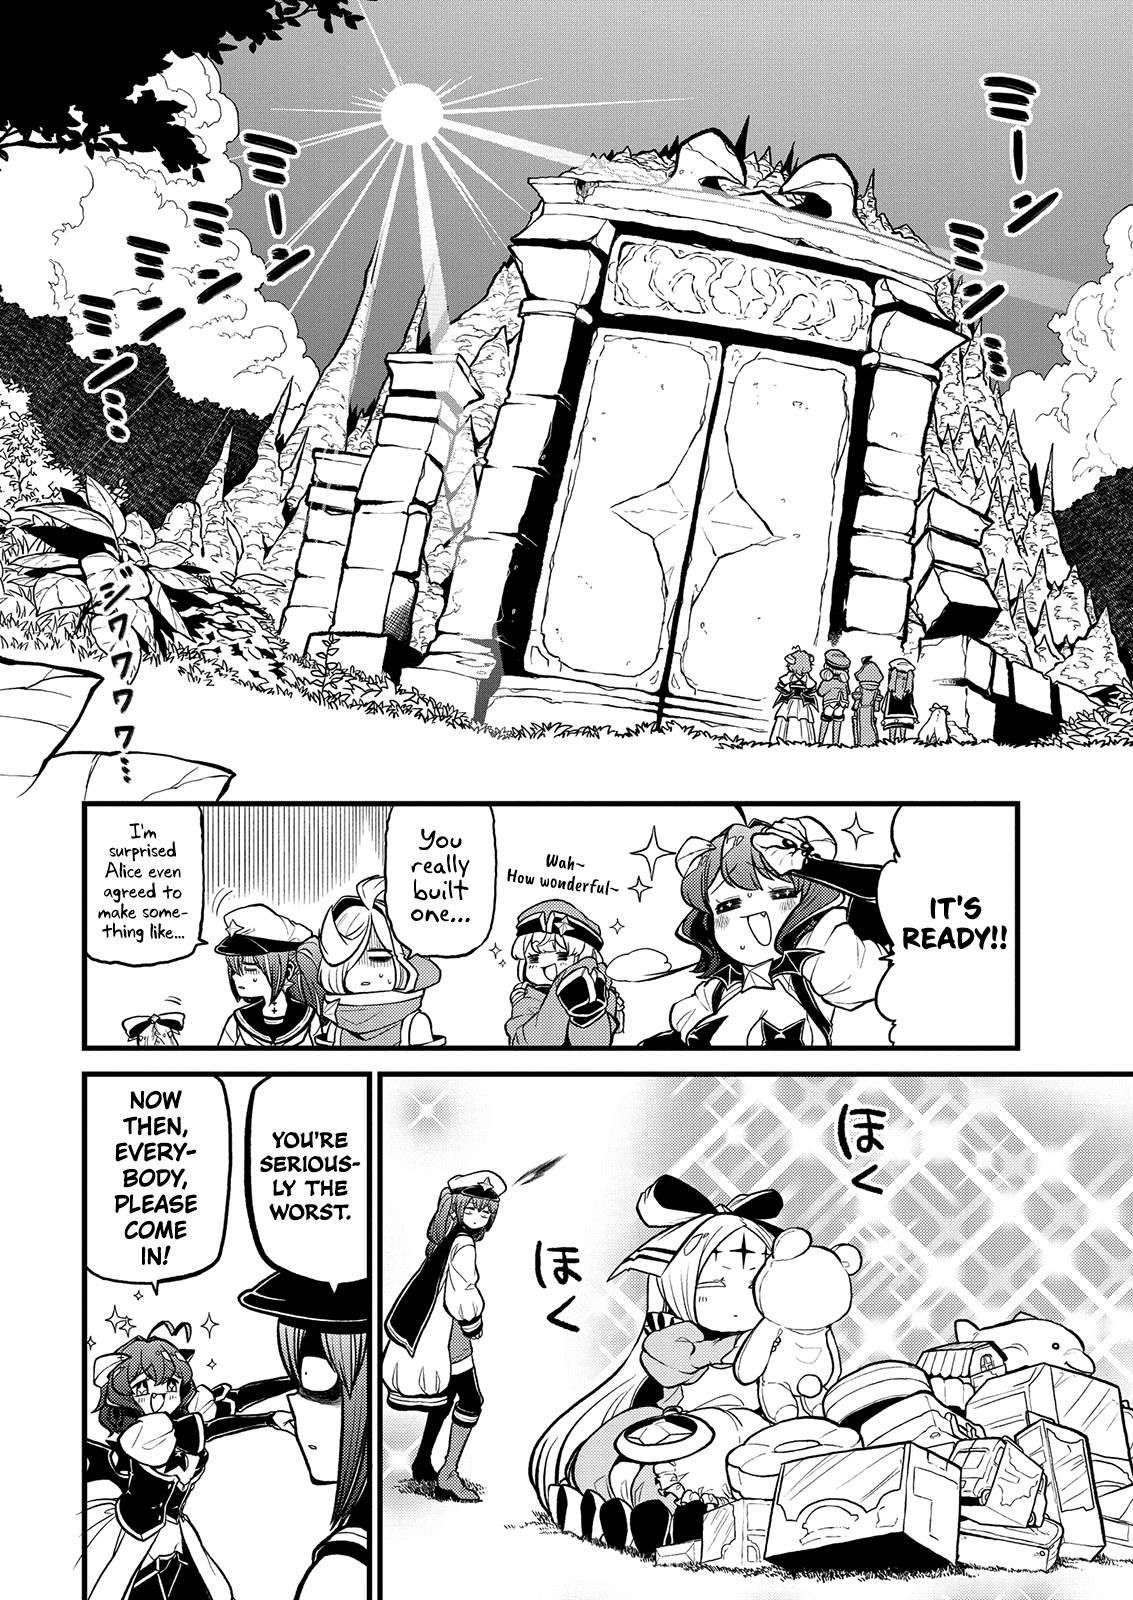 Gushing over Magical Girls - chapter 28 - #4